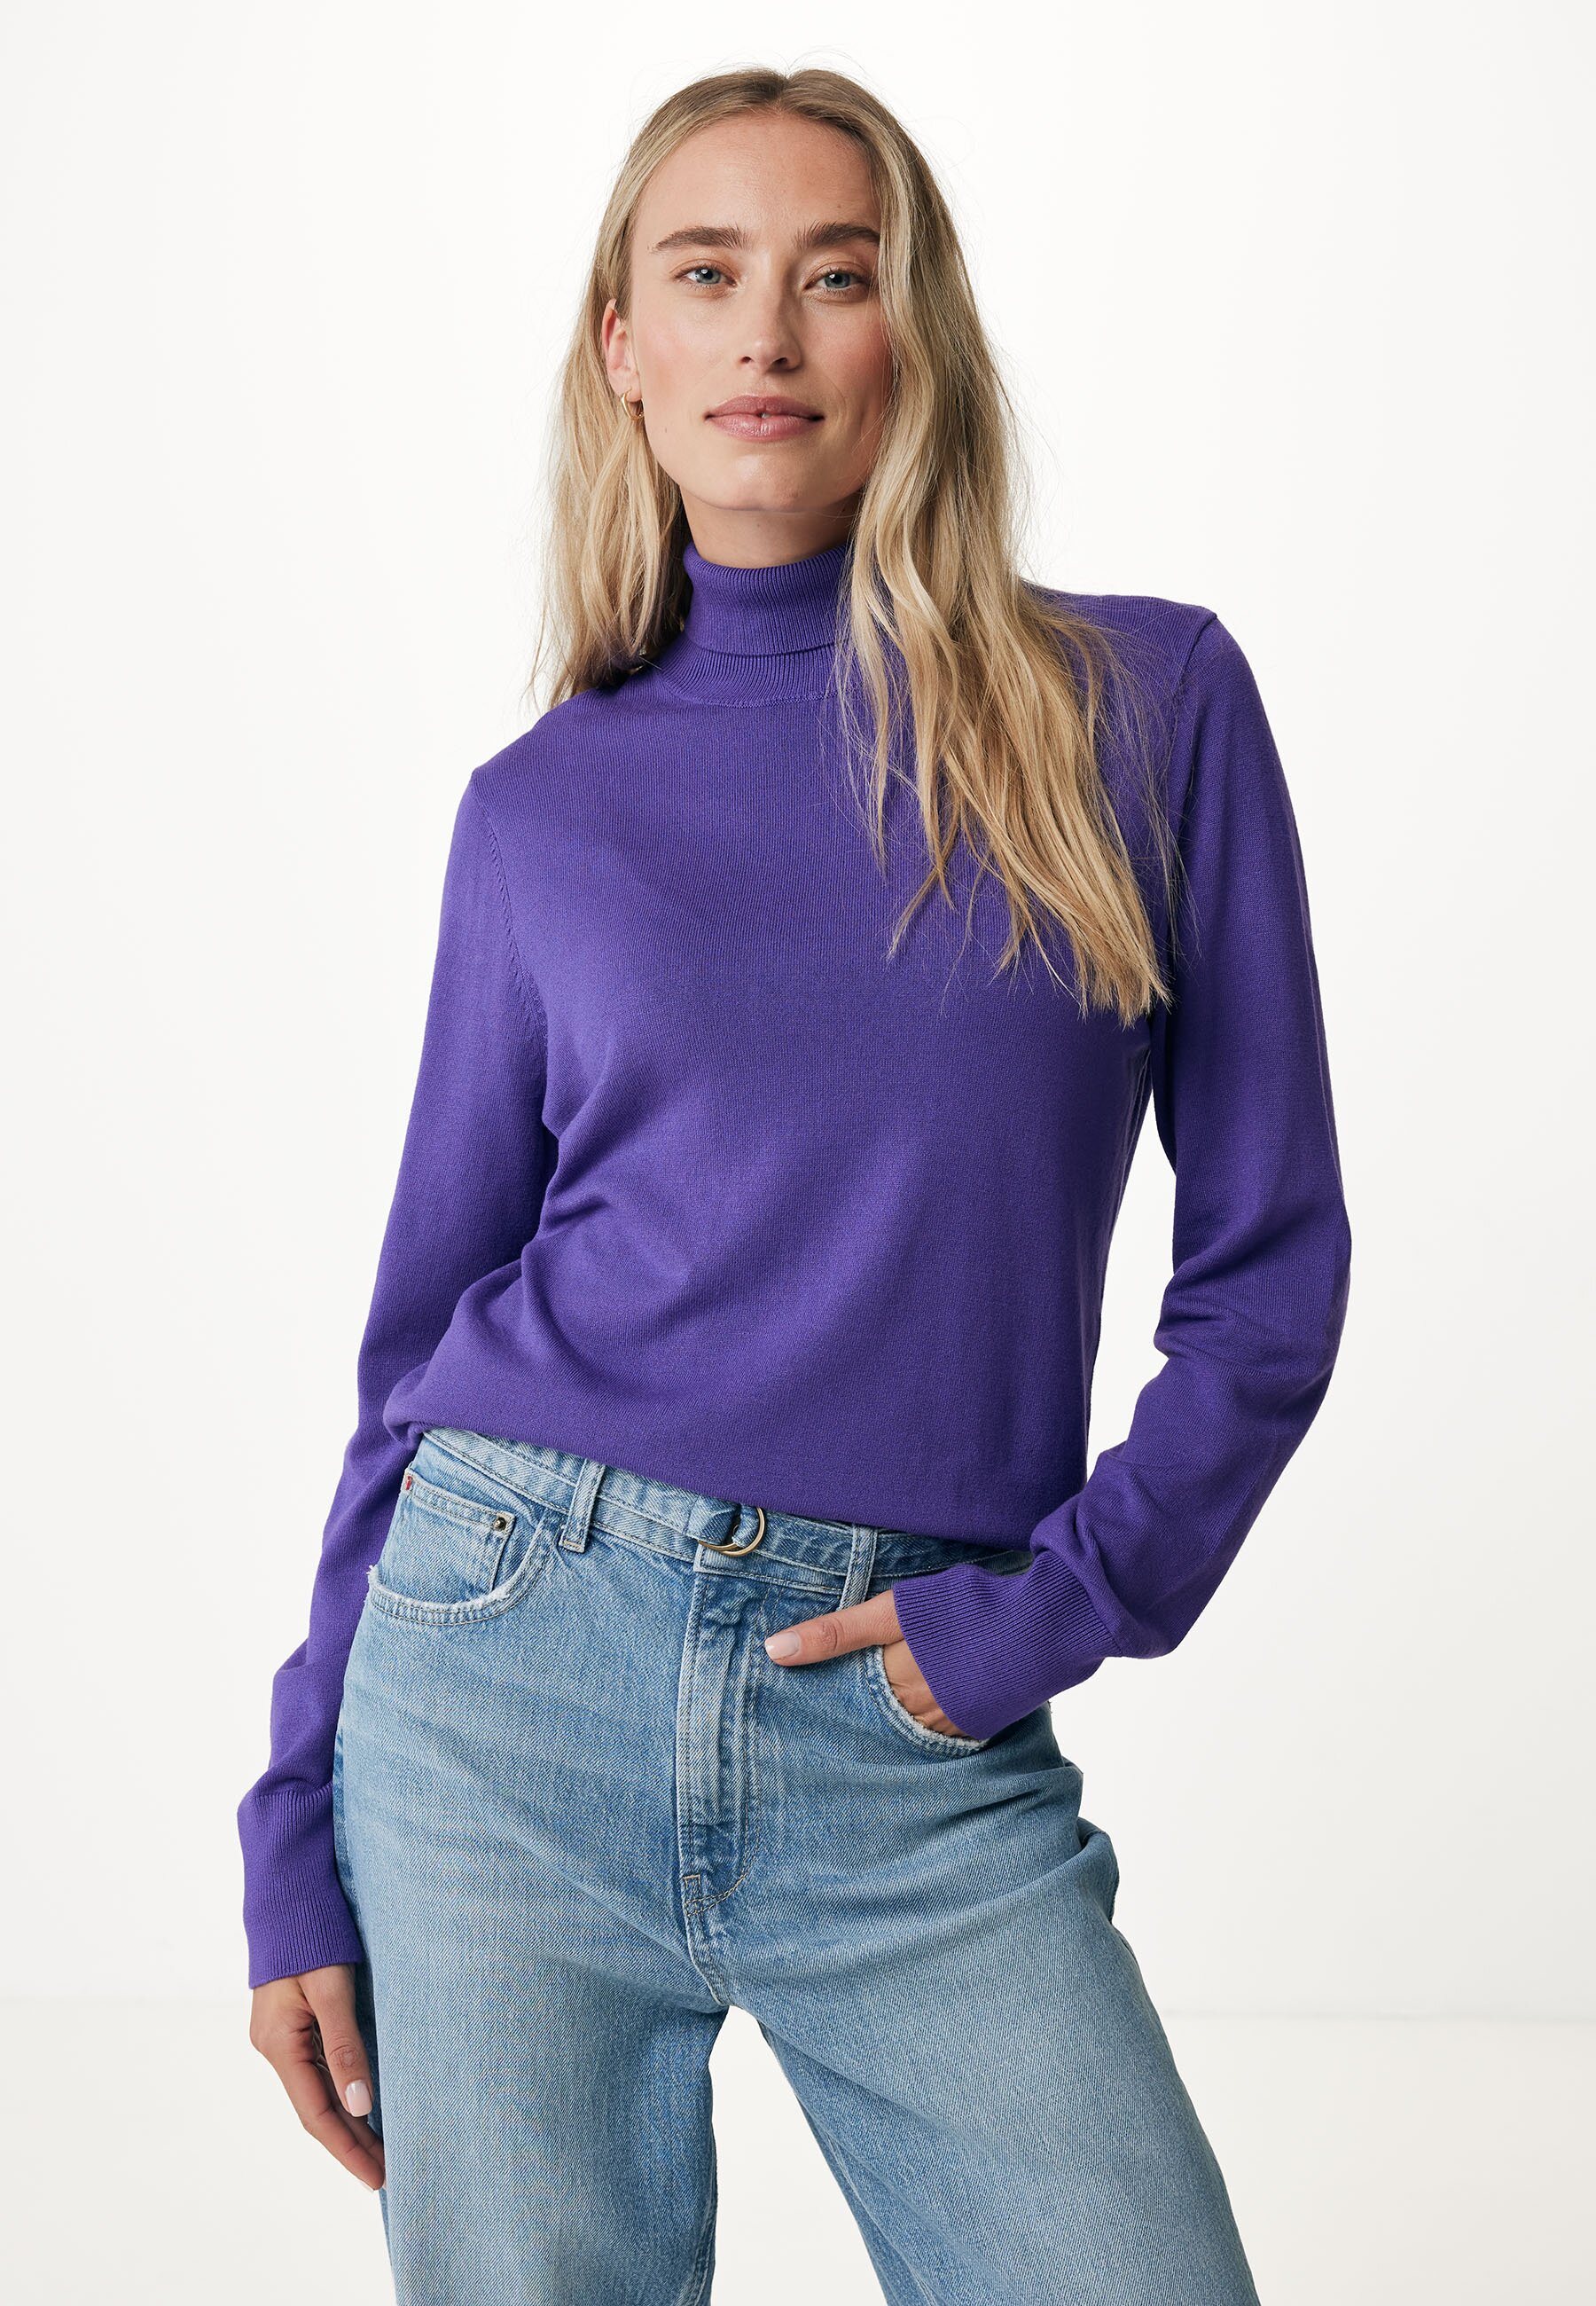 Mexx EMILY Basic Turtle Neck Knit Trui Dames - Paars - Maat S